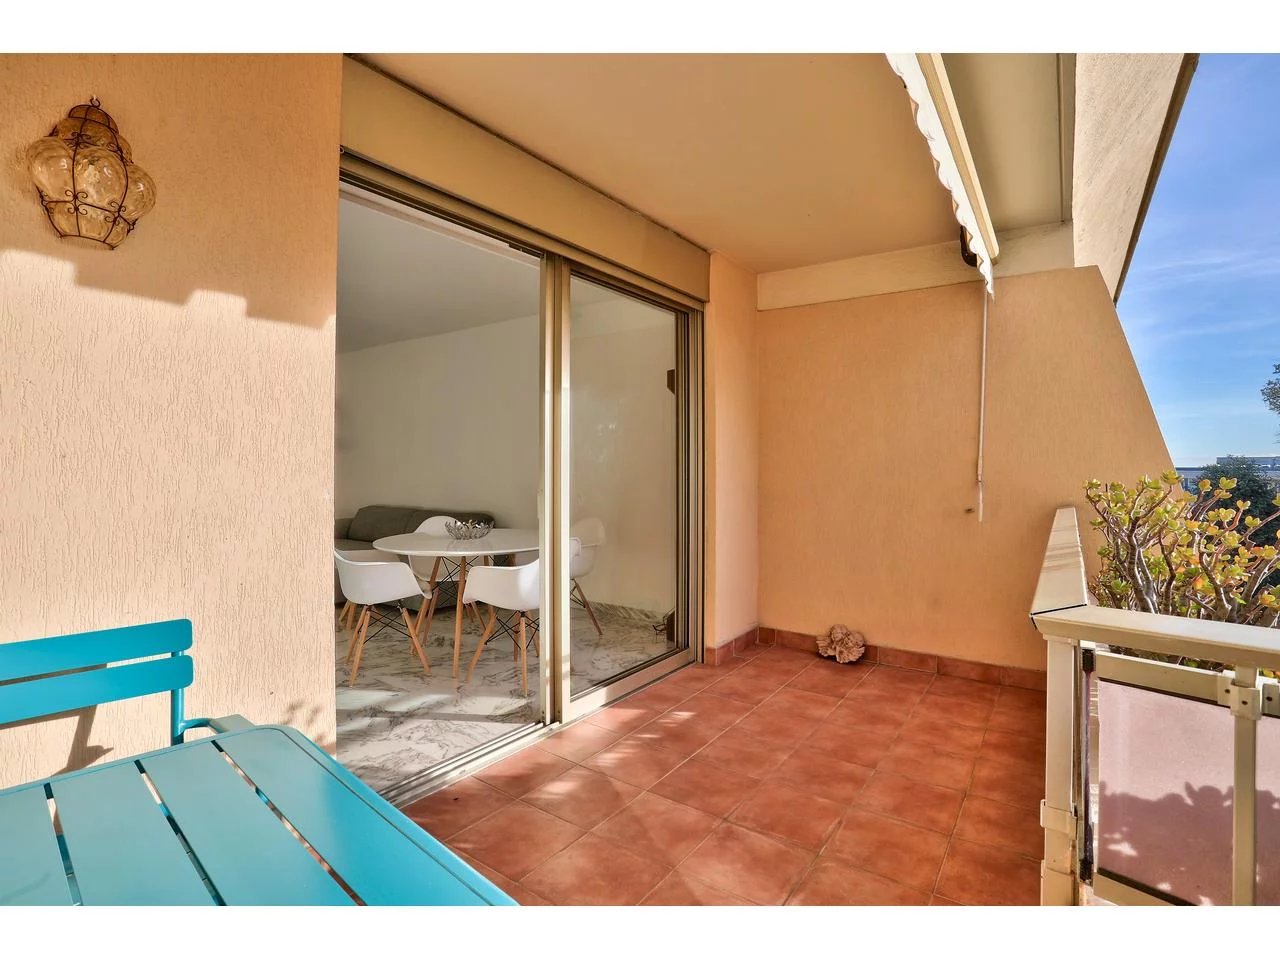 Appartement  2 Rooms 53.52m2  for sale   395 000 €